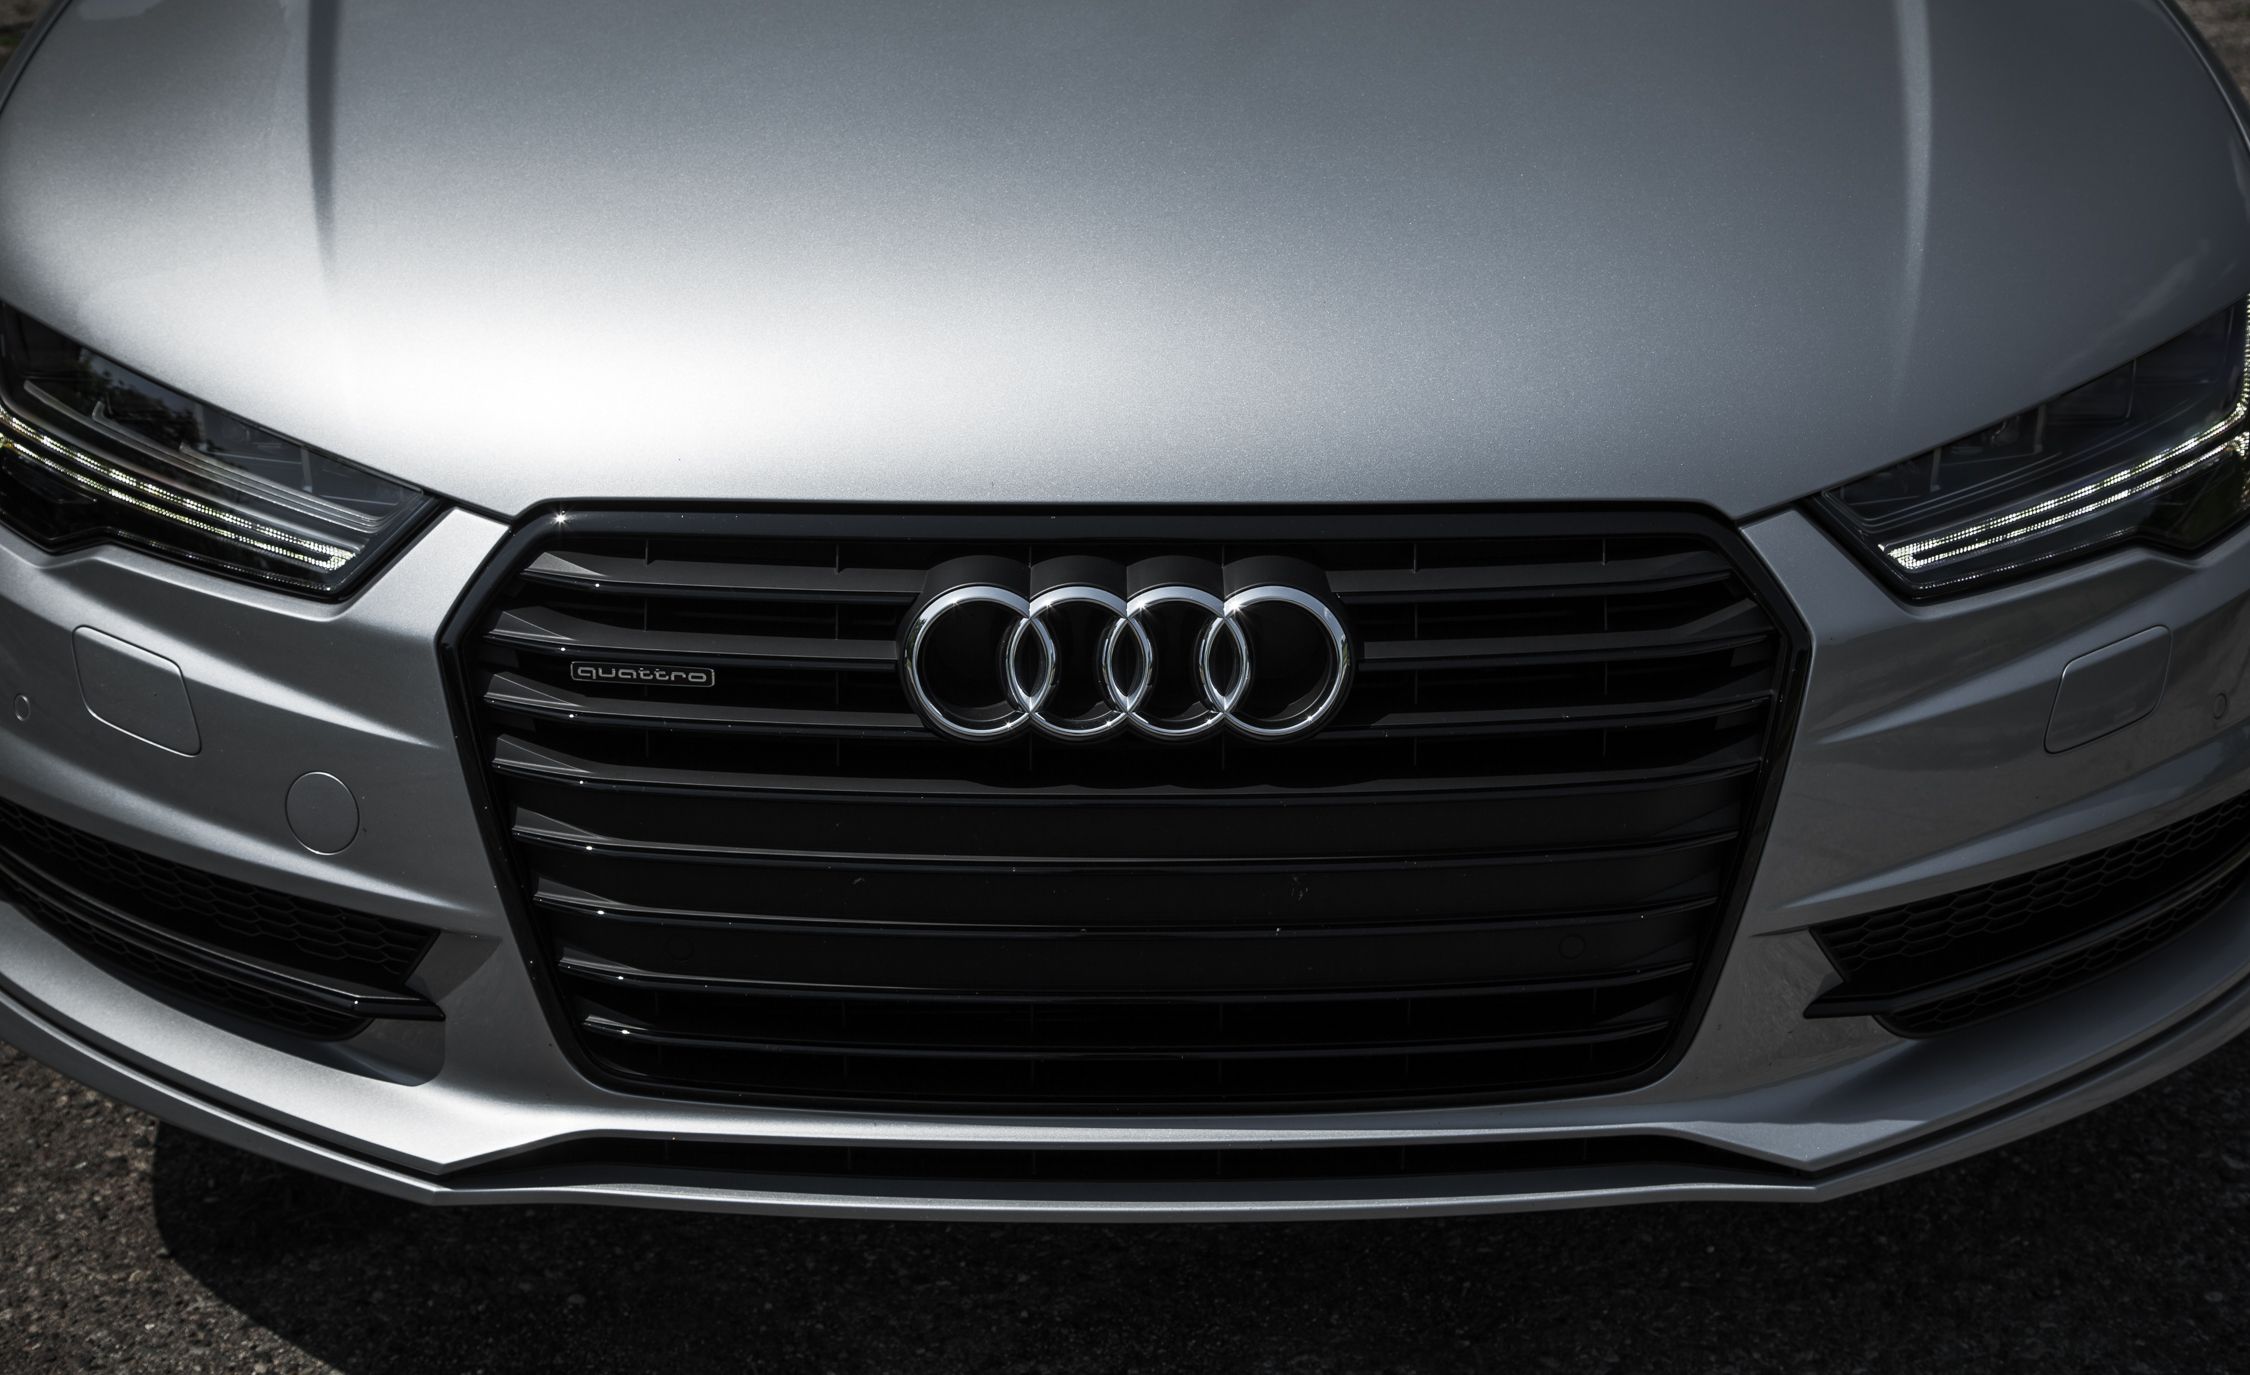 2016 Audi A7 Exterior View Grille And Bumper (View 21 of 26)